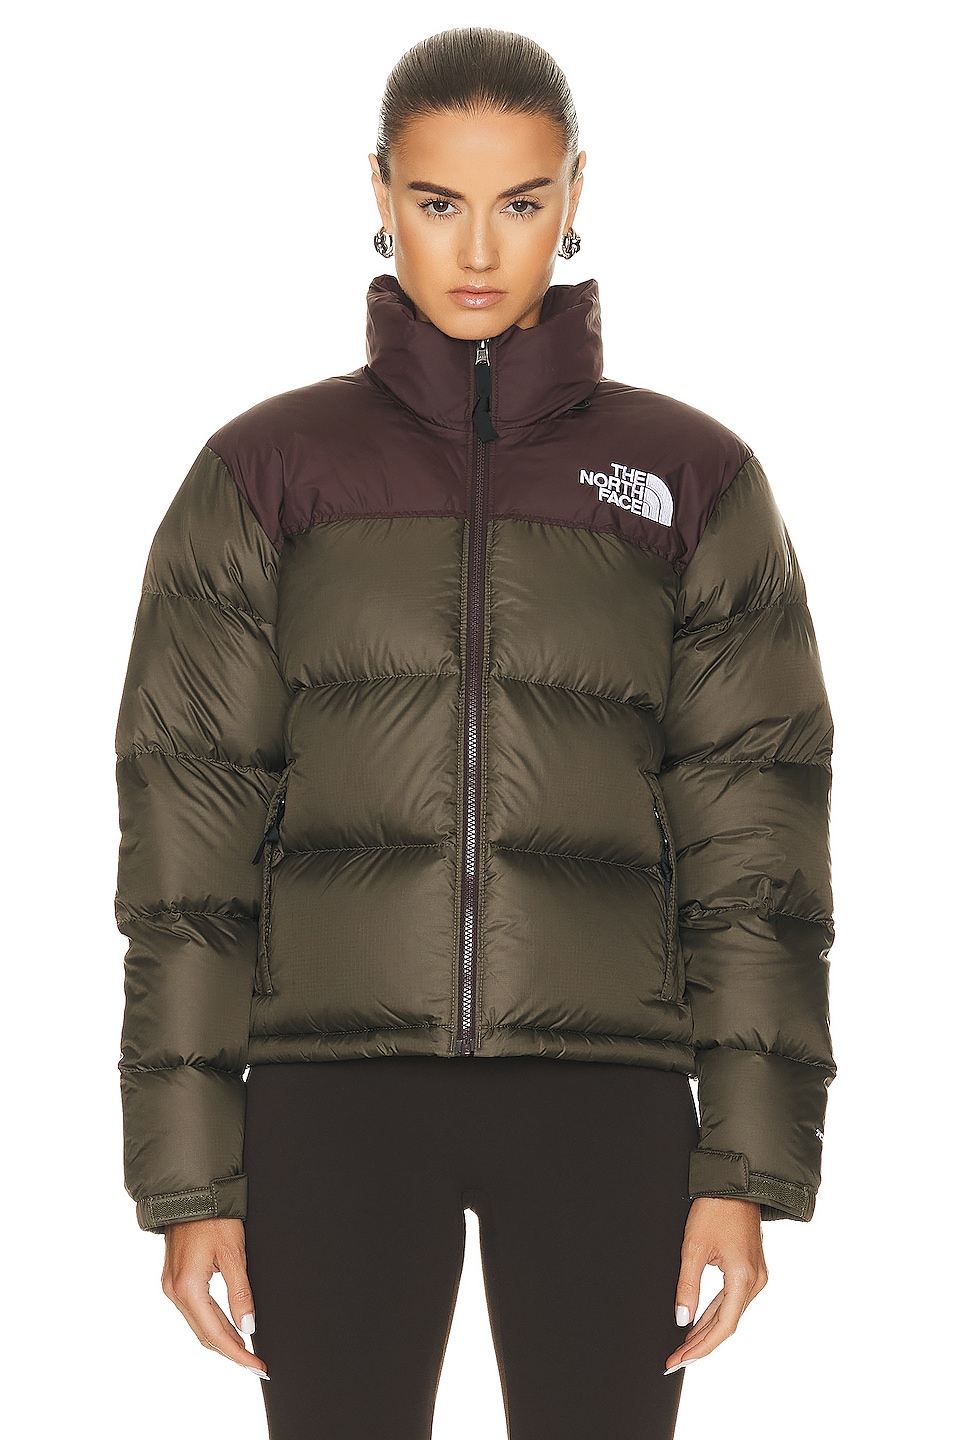 The North Face 1996 Retro Nuptse Jacket in New Taupe Green & Coal Brown ...